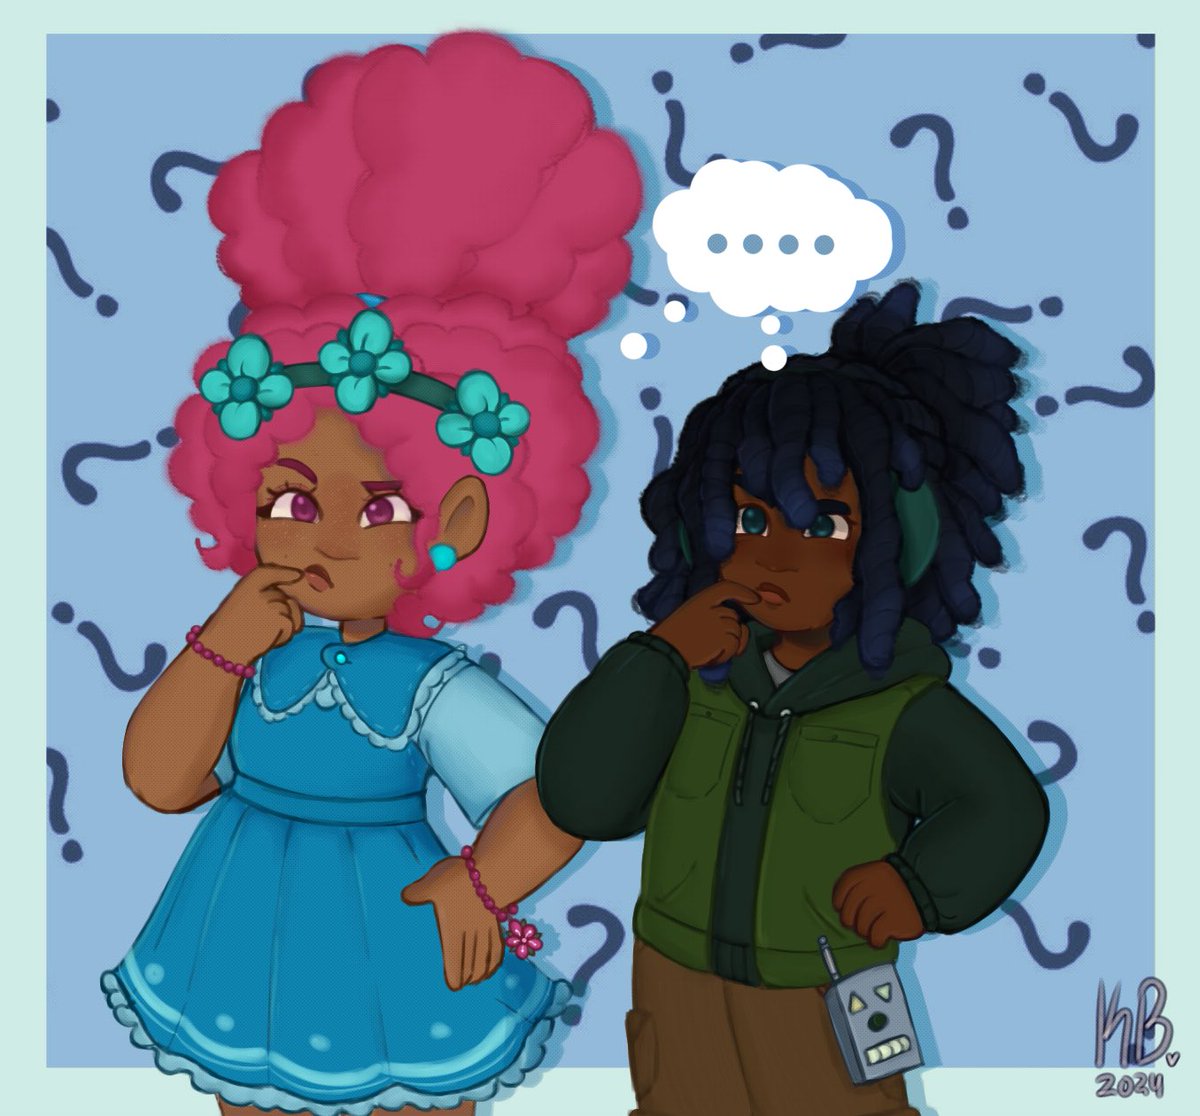 what do u guys think they are pondering about...
🌸🪵
#trolls #trollstwt #broppy